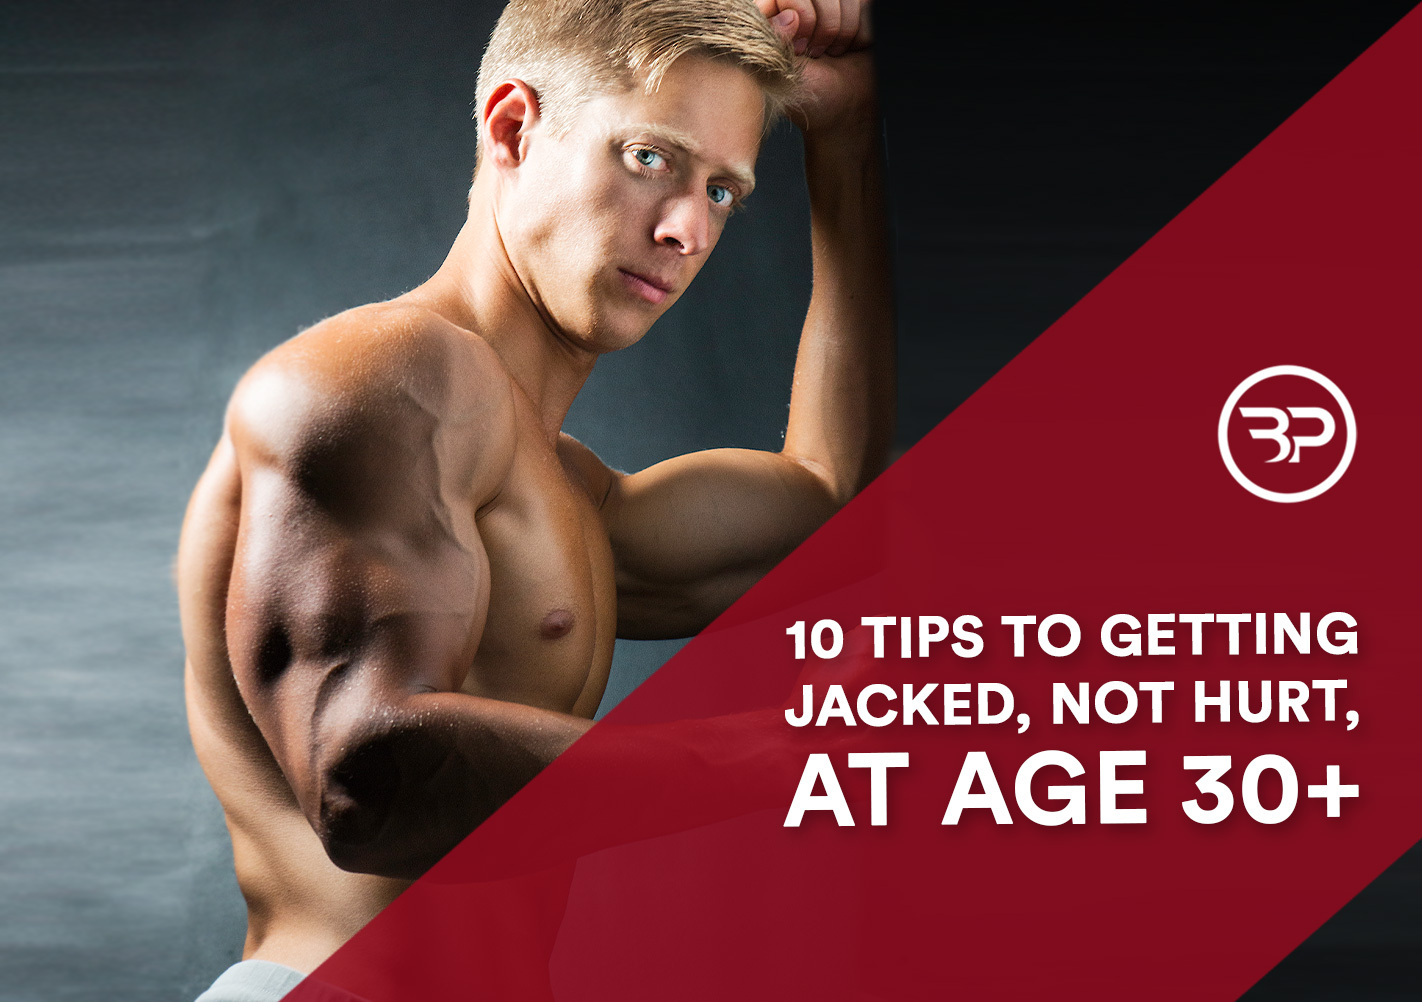 Get Jacked, Not Hurt, At Age 30+